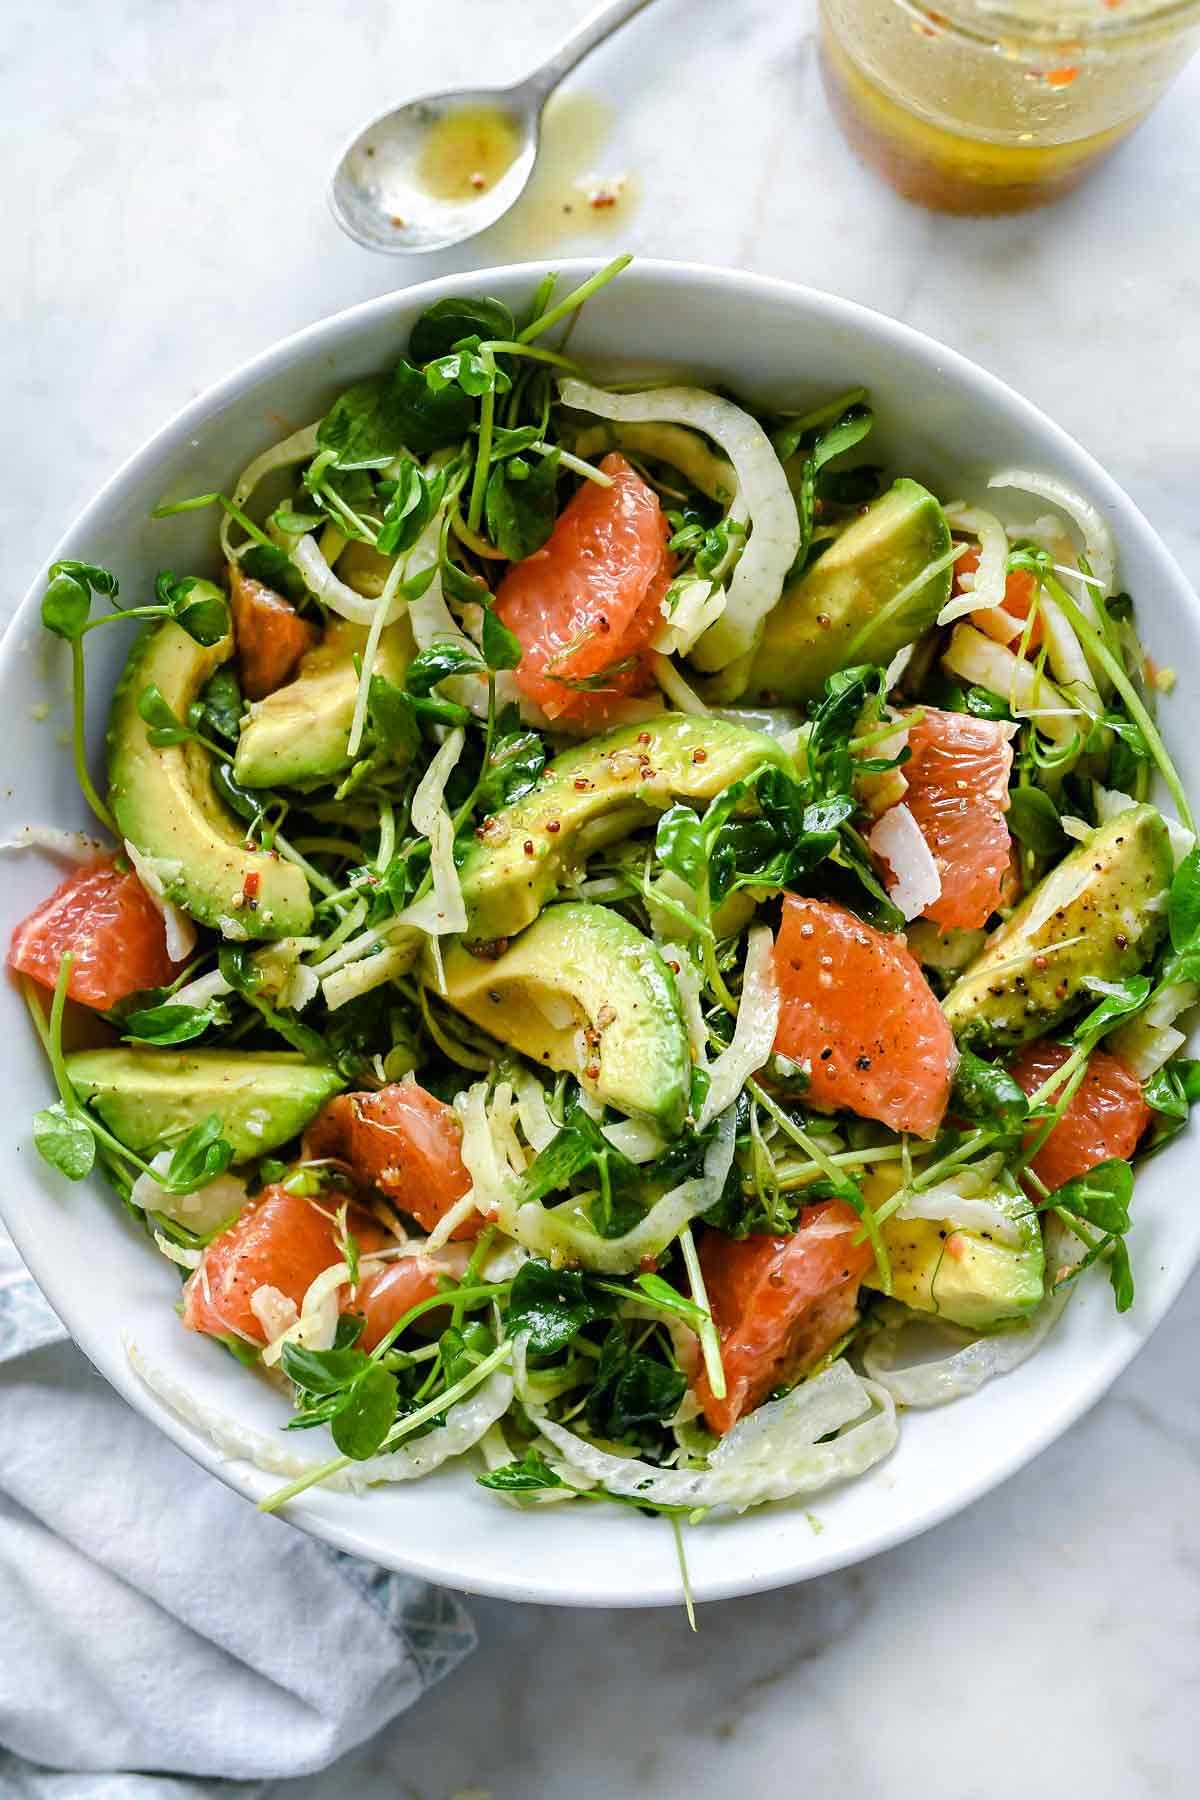 Bowl of avocado salad with grapefruit and mixed greens, dressed with vinaigrette